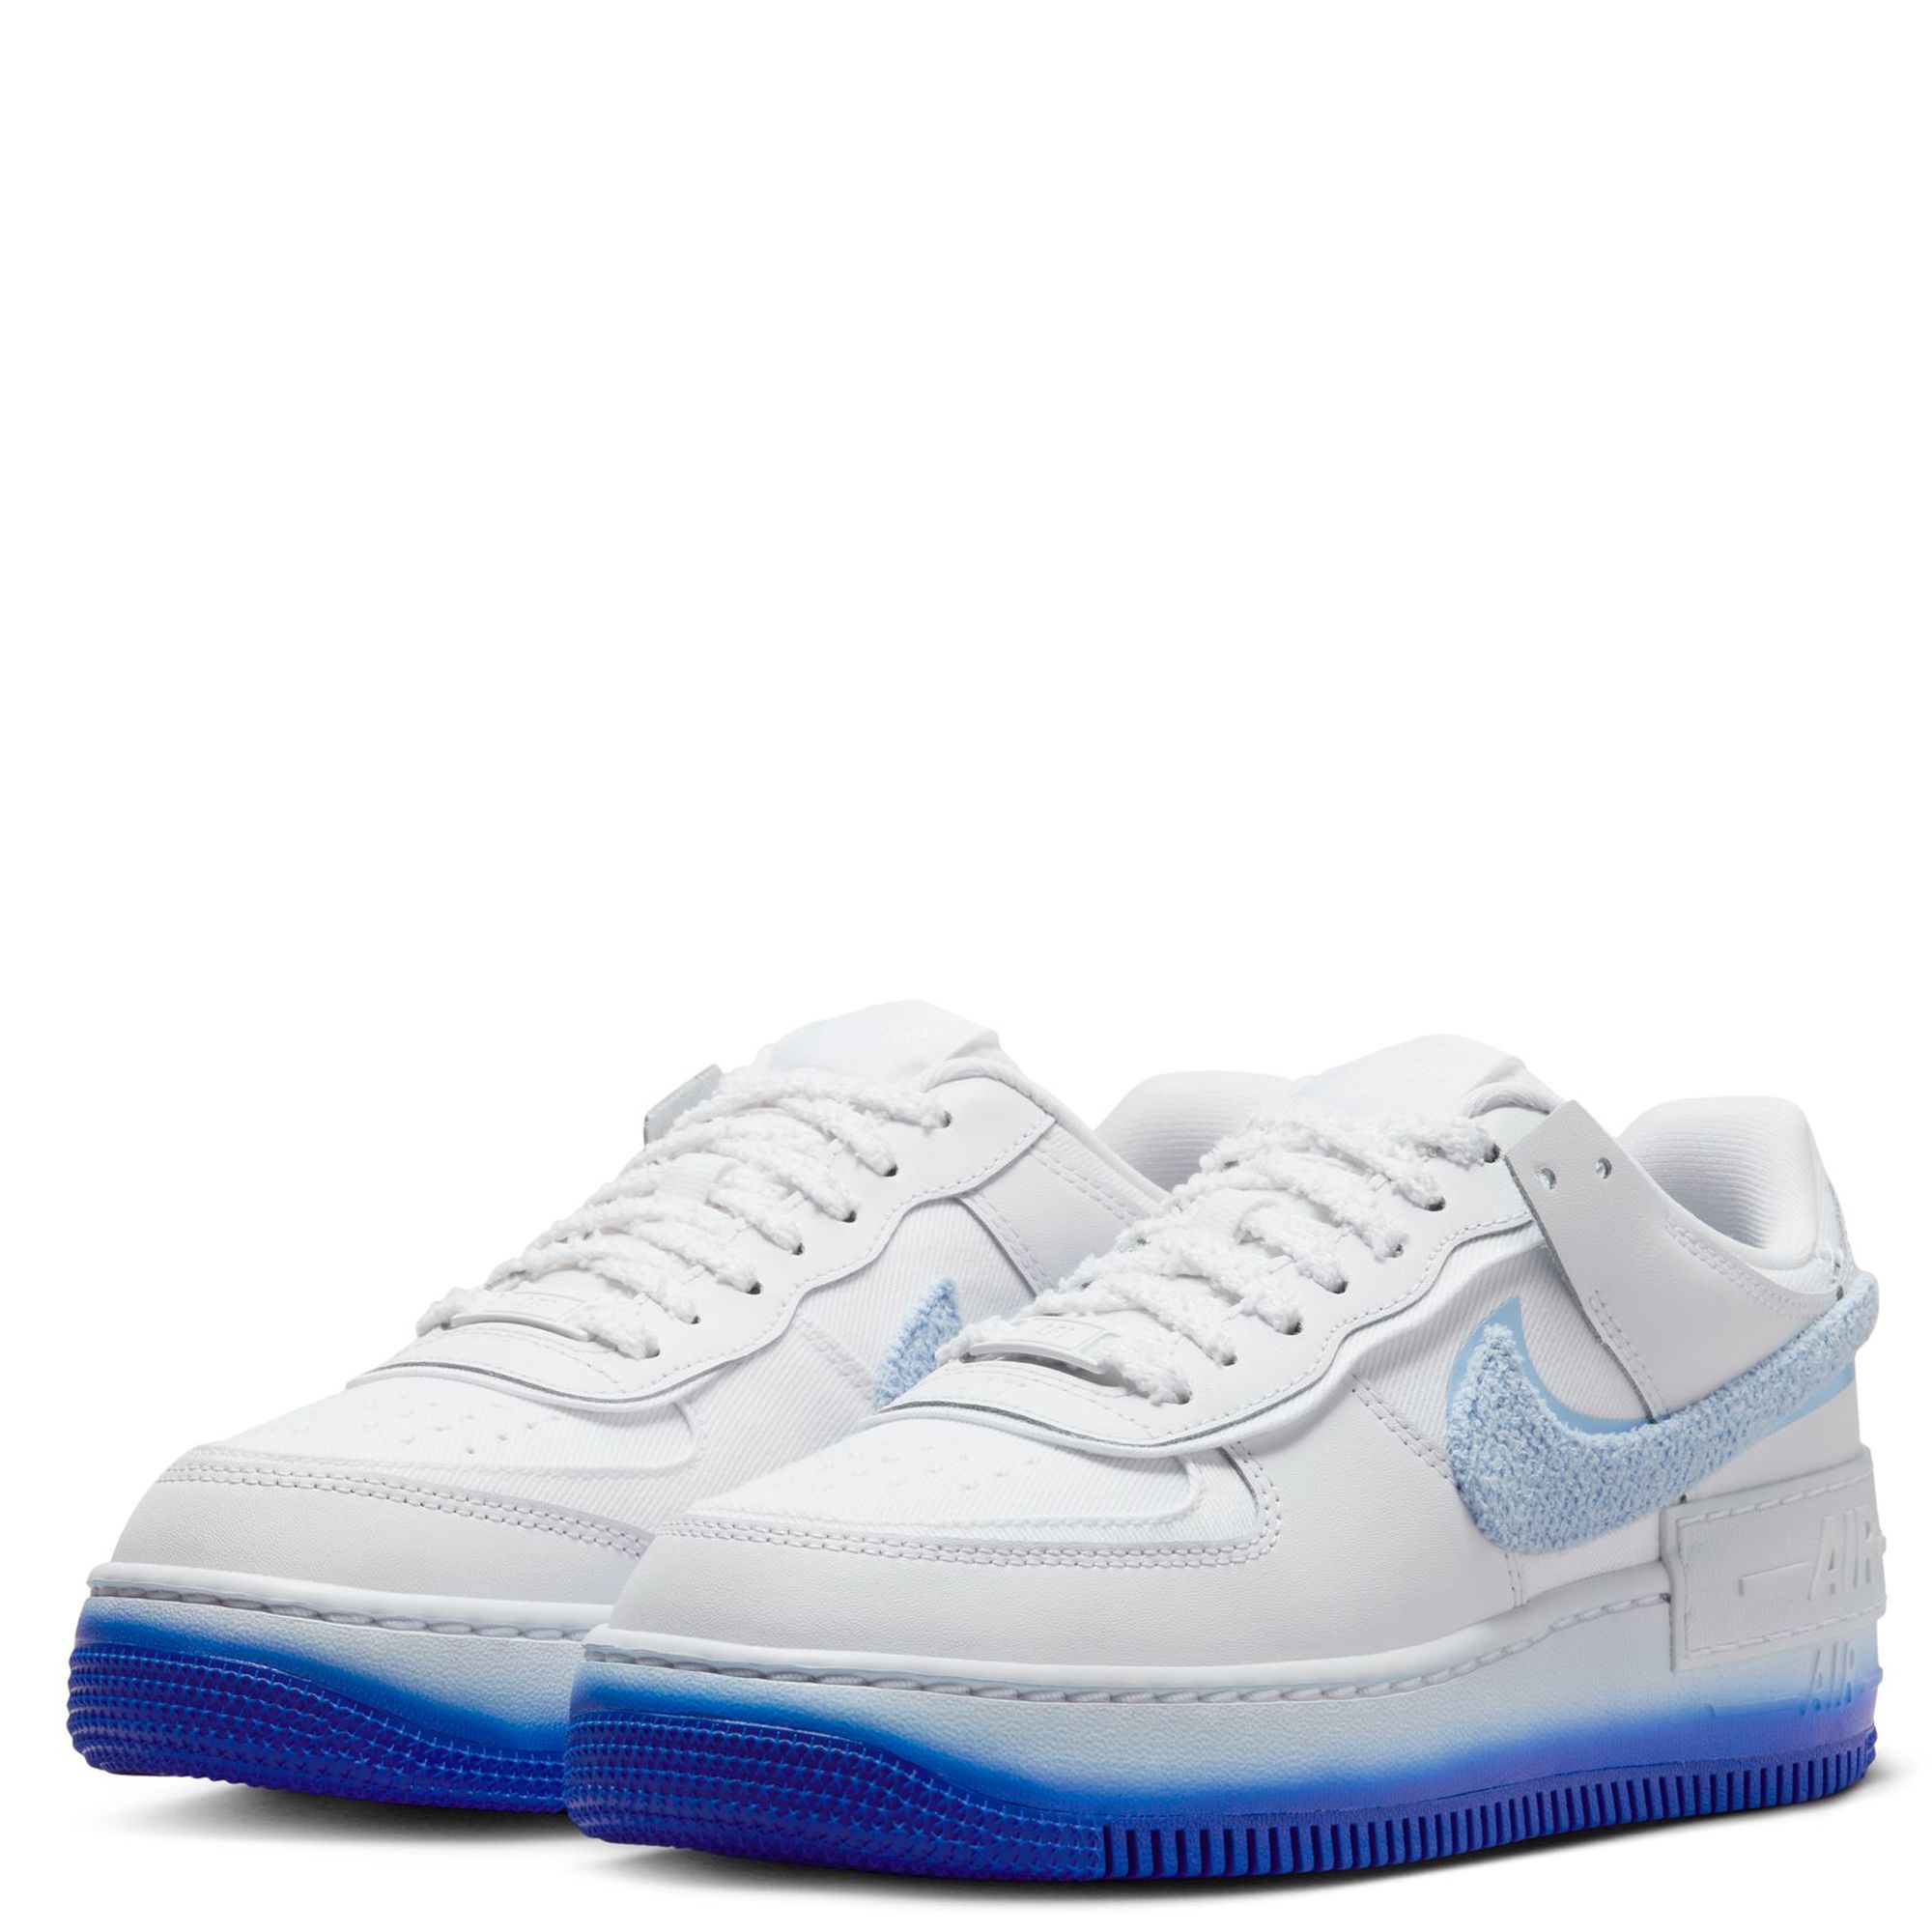 Nike Air Force 1 LV8 Platinum Tint Review& On foot 